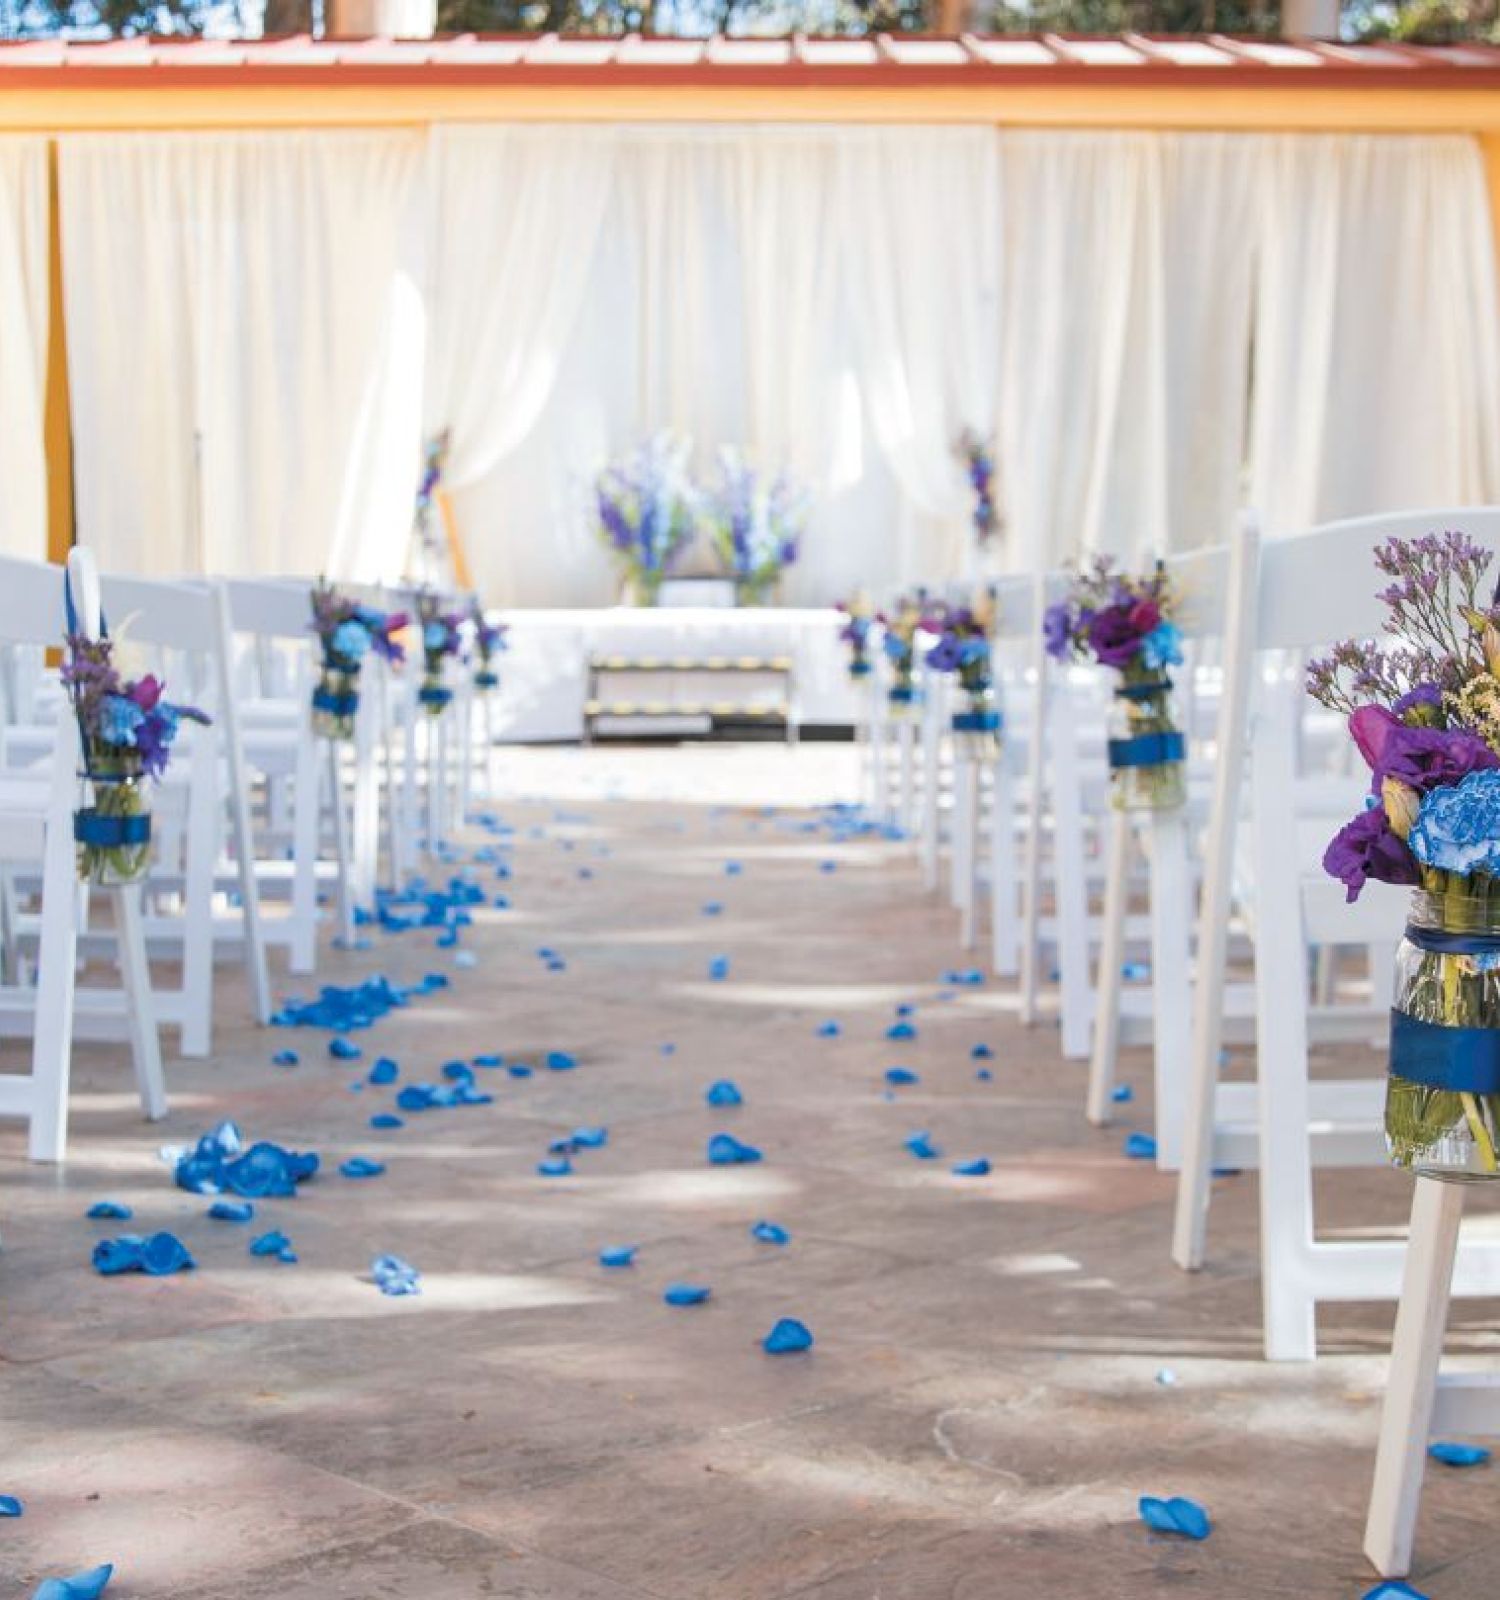 The image shows an outdoor wedding setup with white chairs adorned with floral arrangements and blue petals scattered on the aisle.